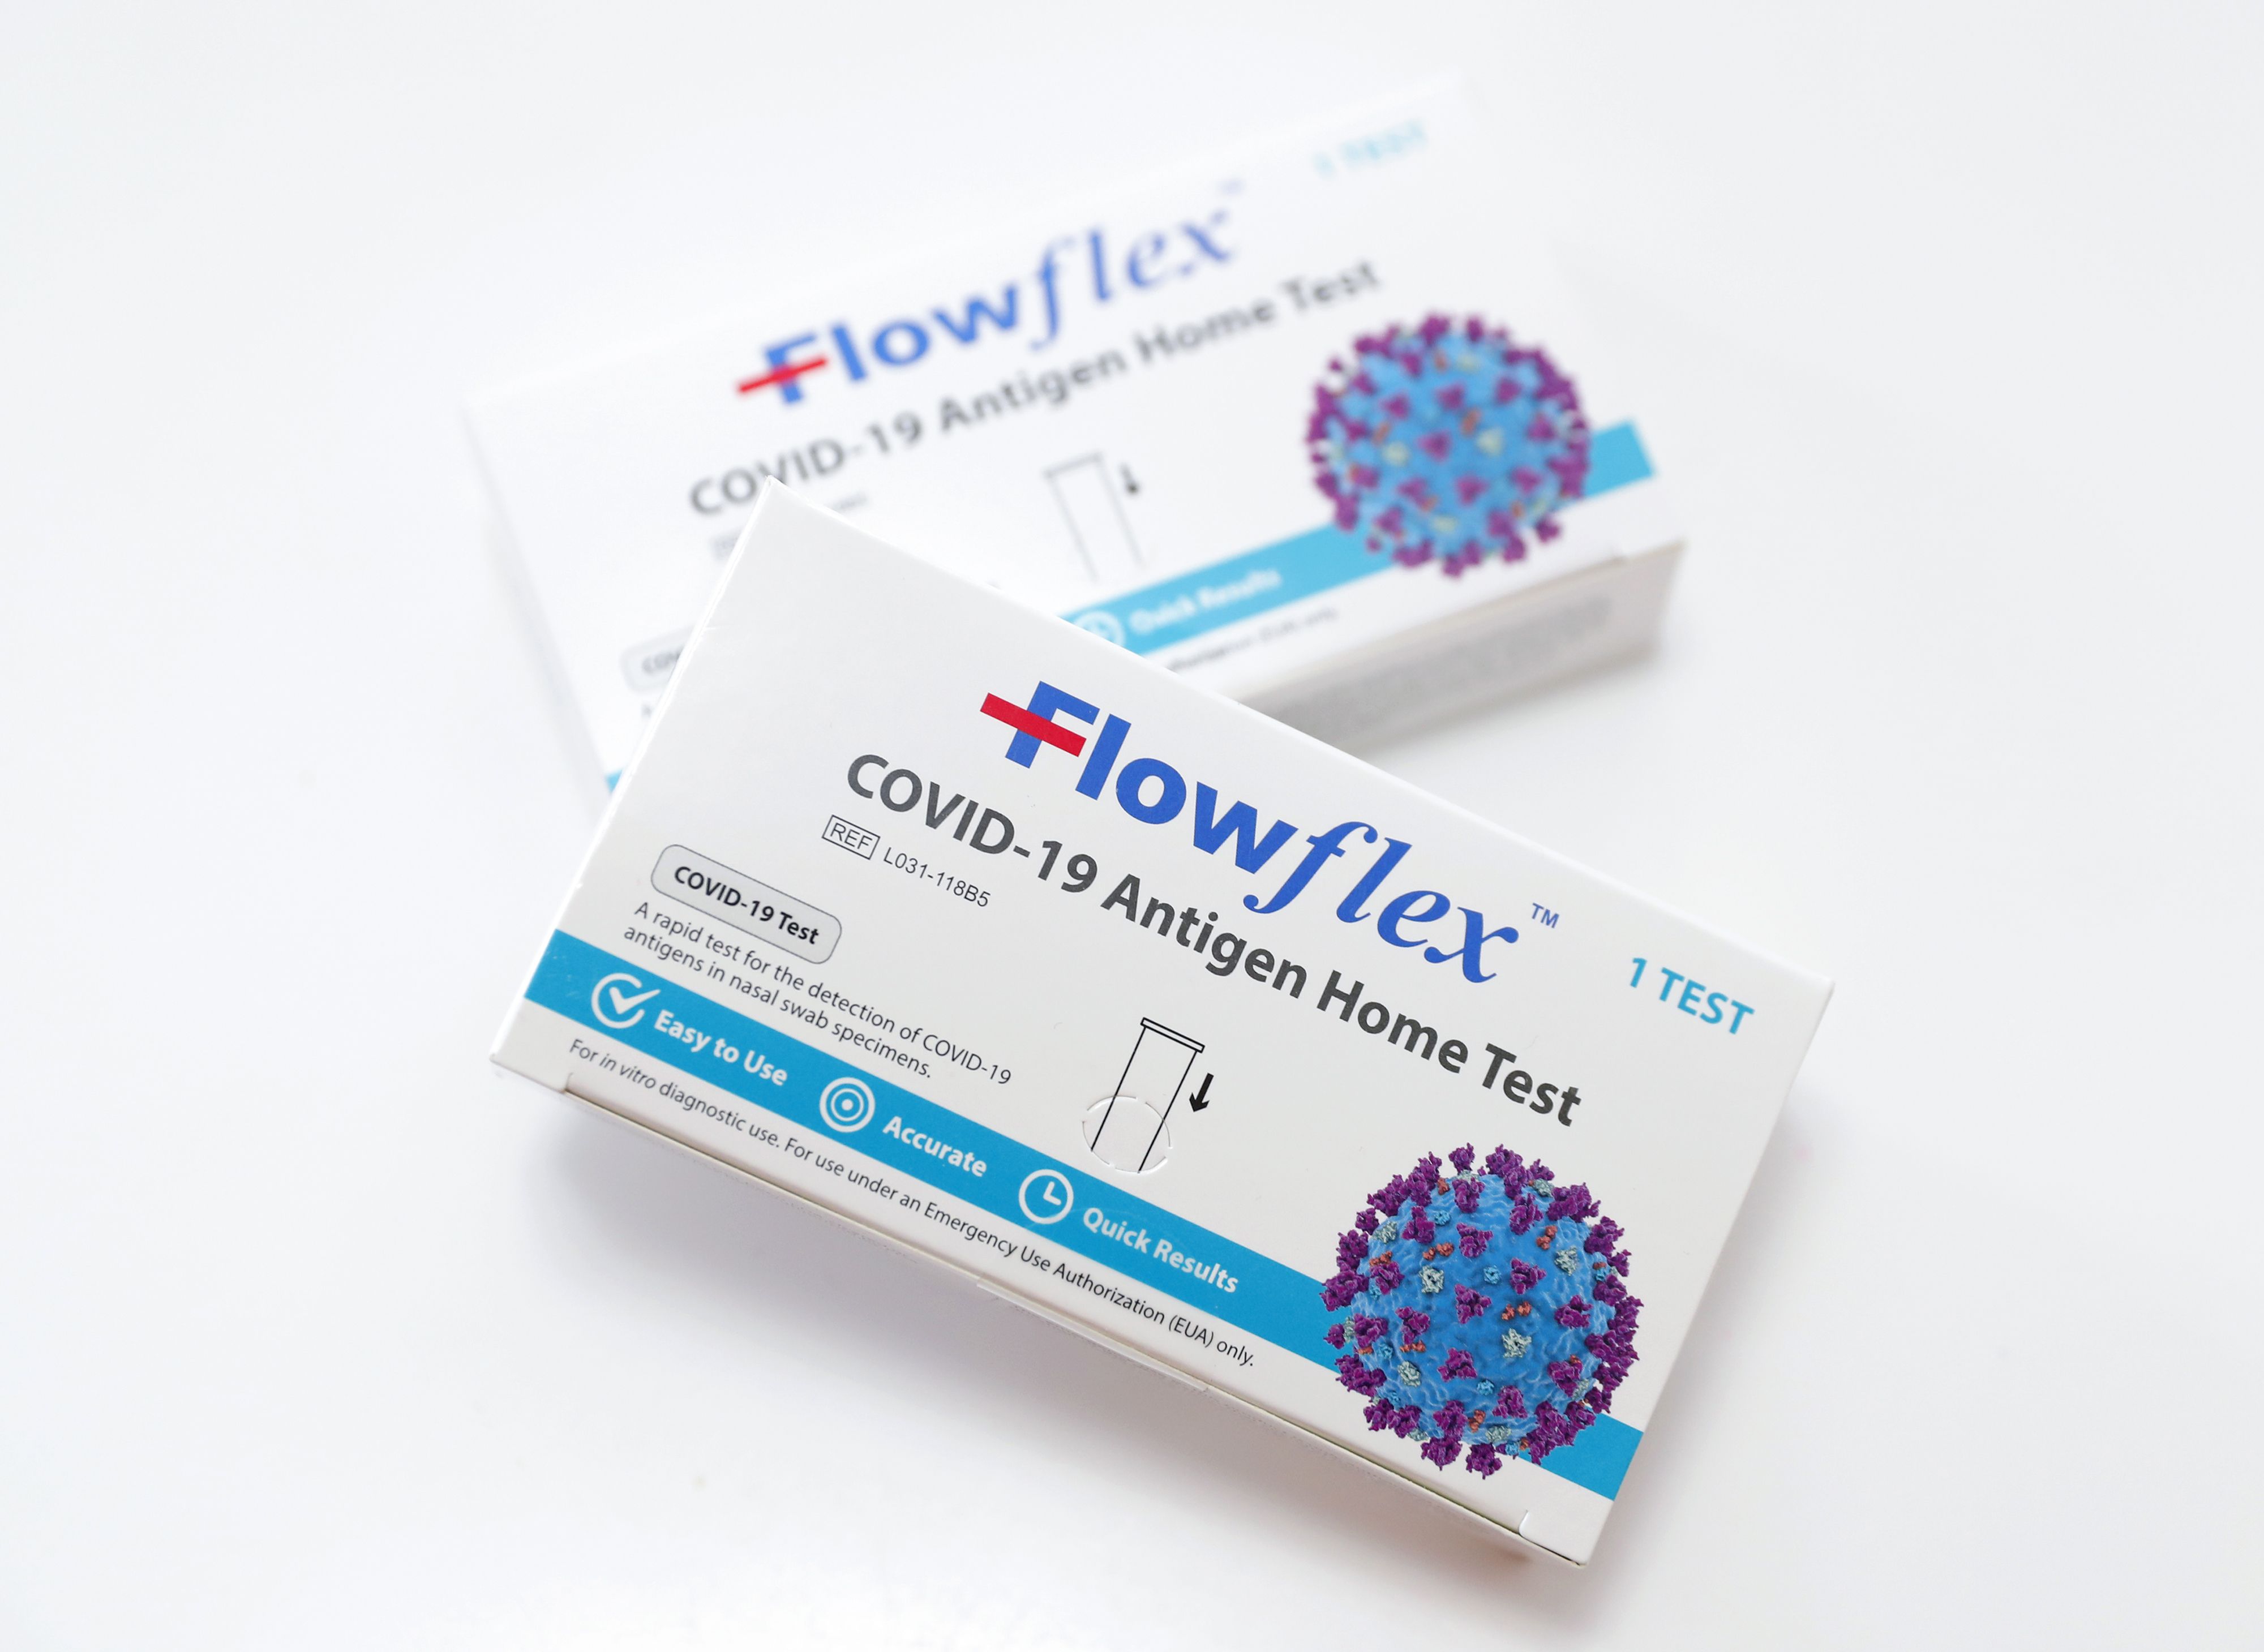 The FlowFlex COVID-19 home test kits is one of the brands given out New York City.